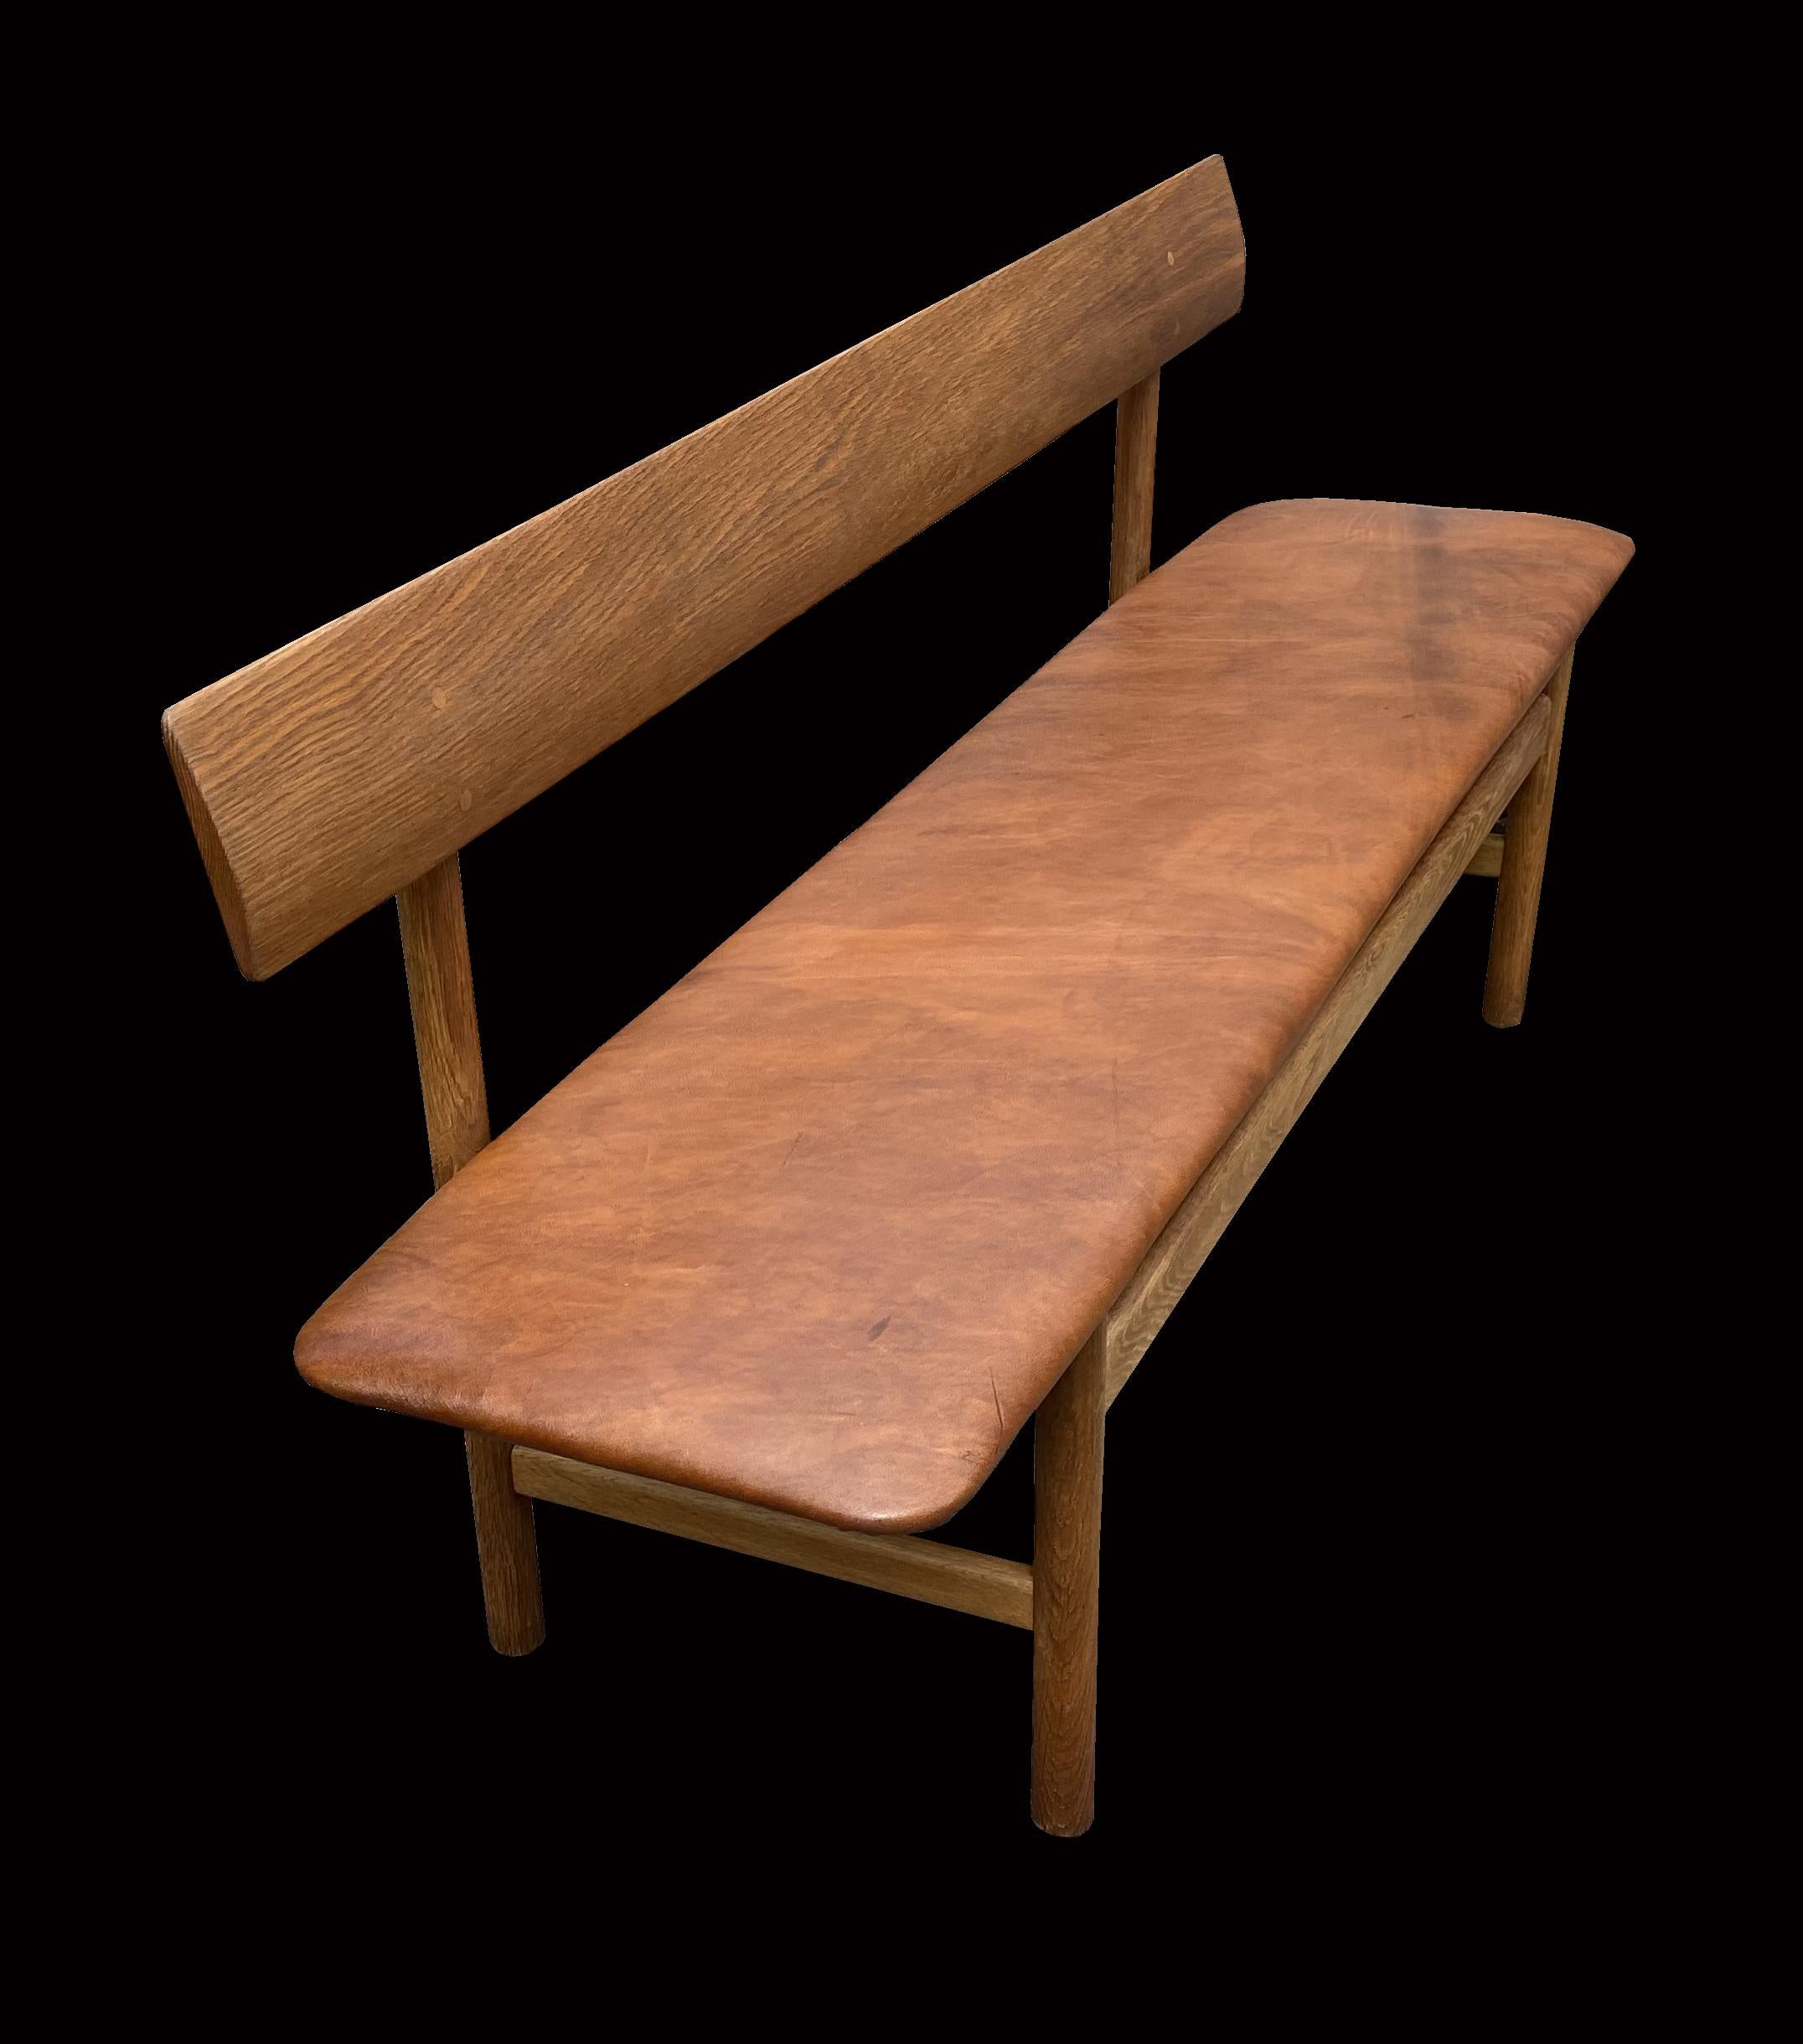 This is a very nice clean original example of this very popular bench in oak with cognac color leather seat pad, designed by Børge Mogensen and manufactured by Fredericia.